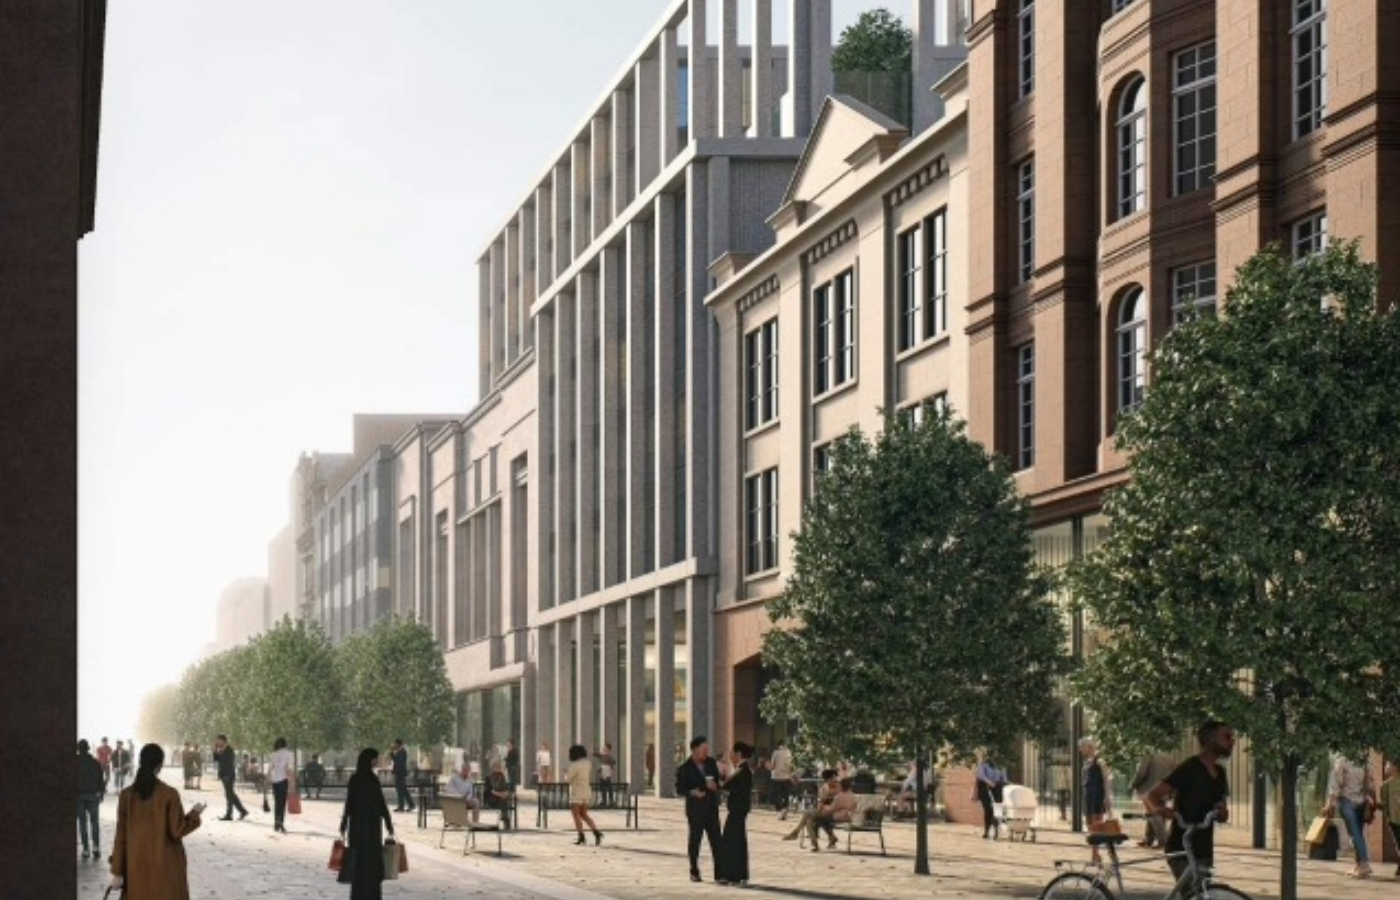 An arcade linking Sauchiehall Street to Renfrew Street would be reintroduced under the new plans. Photo: Fusion